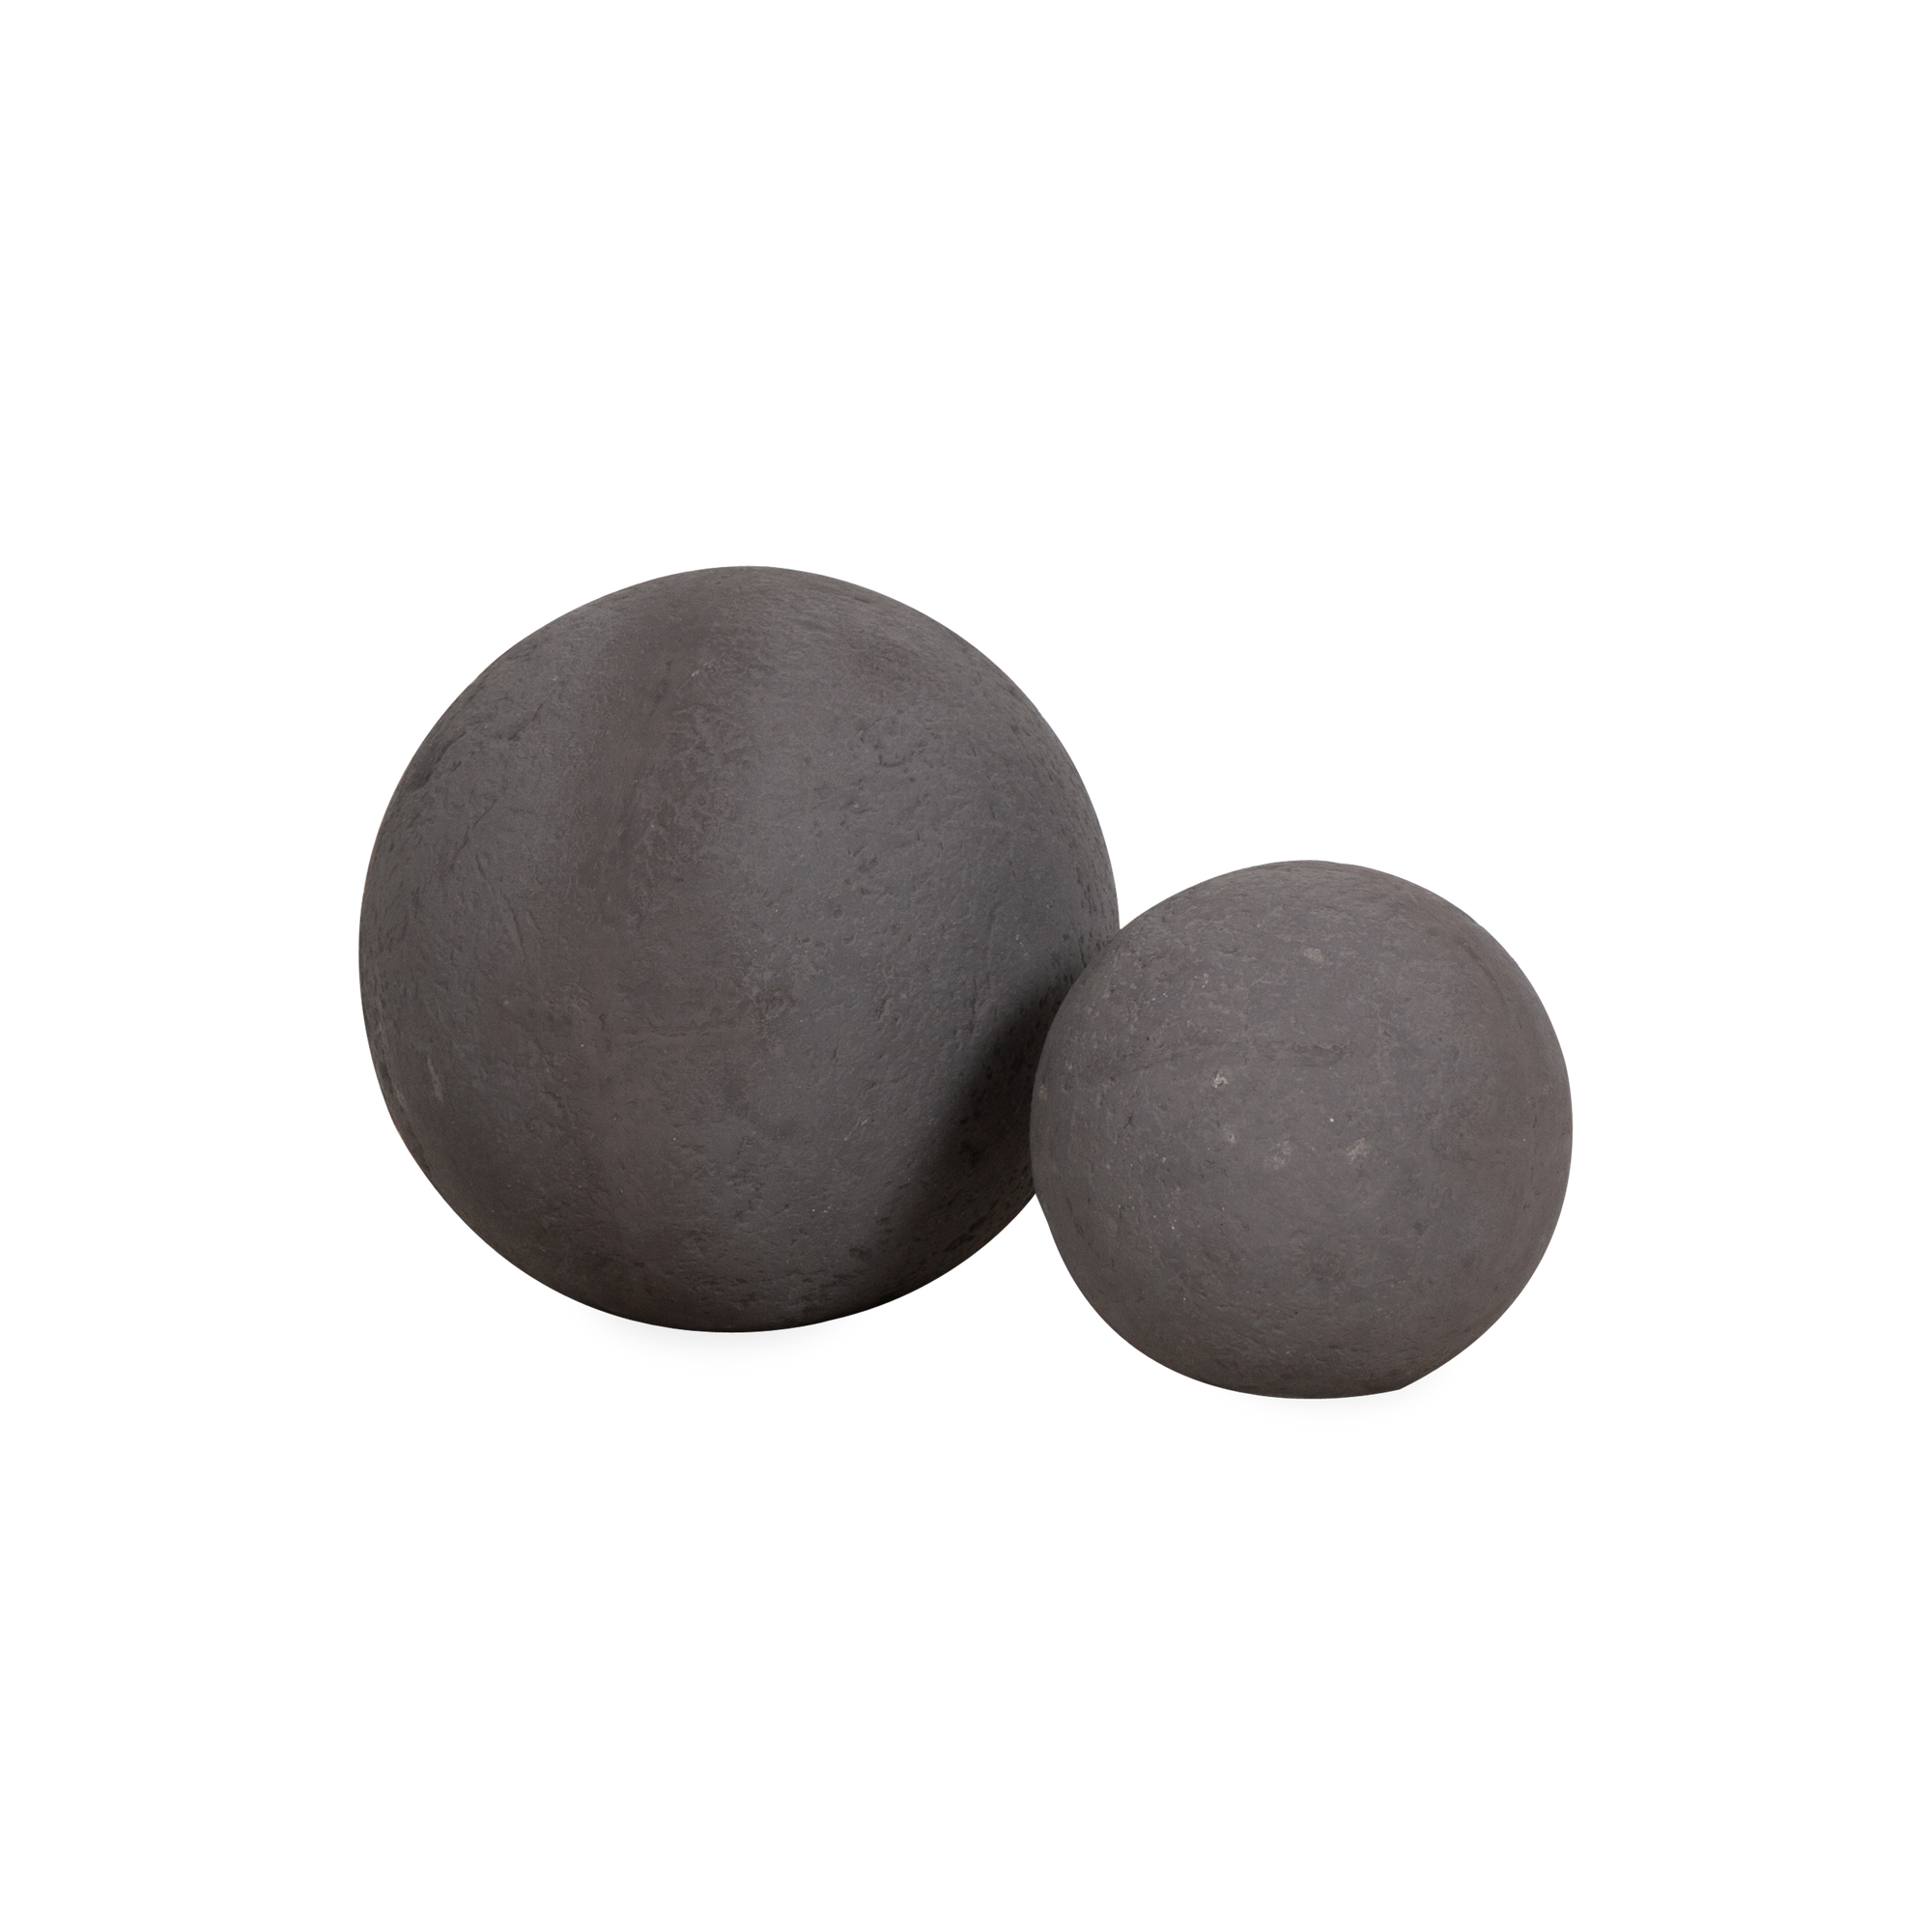 A unique and modern accent, the Molly Spheres effortlessly merges industrial chic with natural aesthetics.